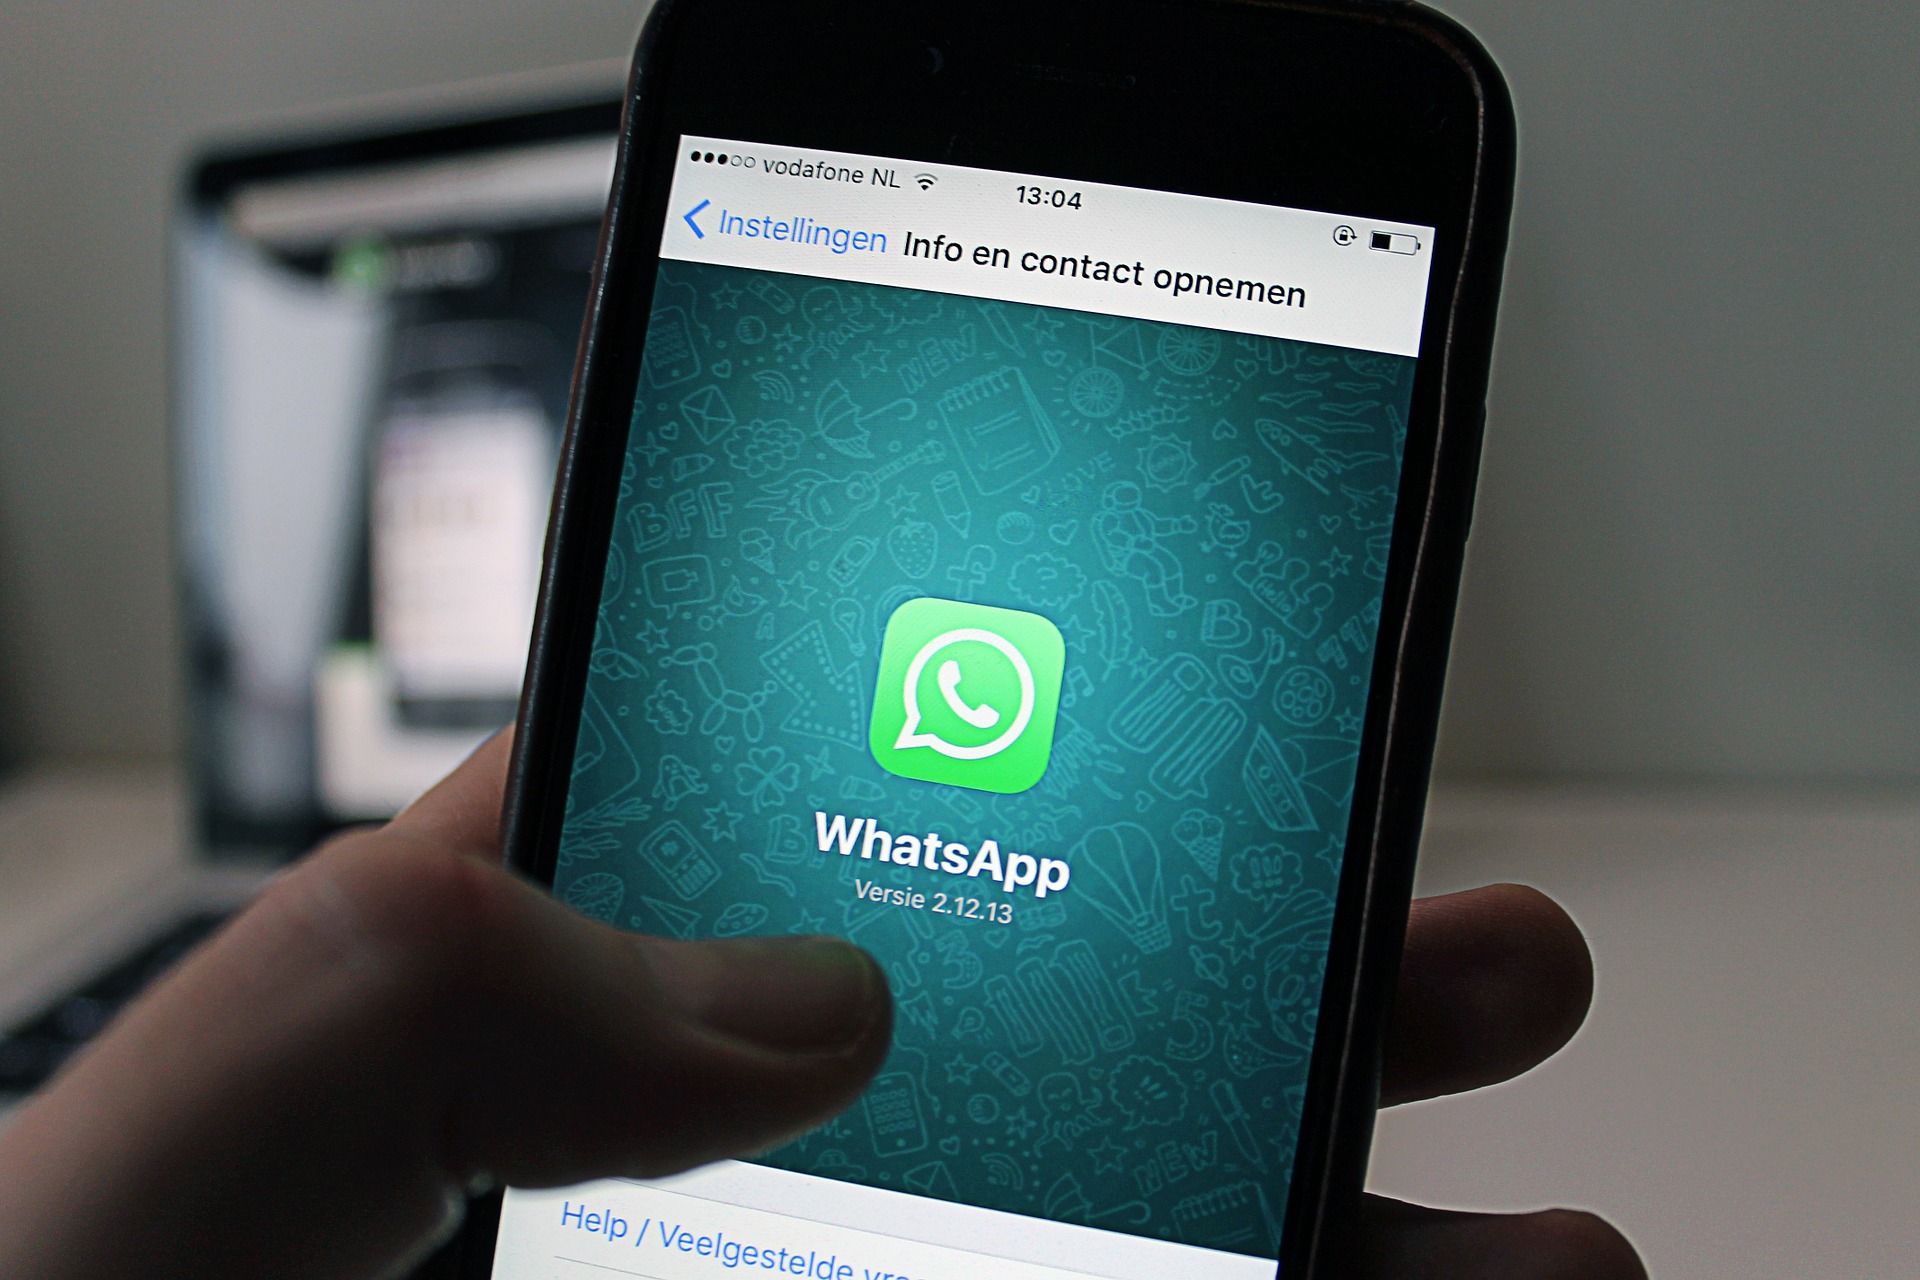 Whatsapp Web to soon support video, voice calls